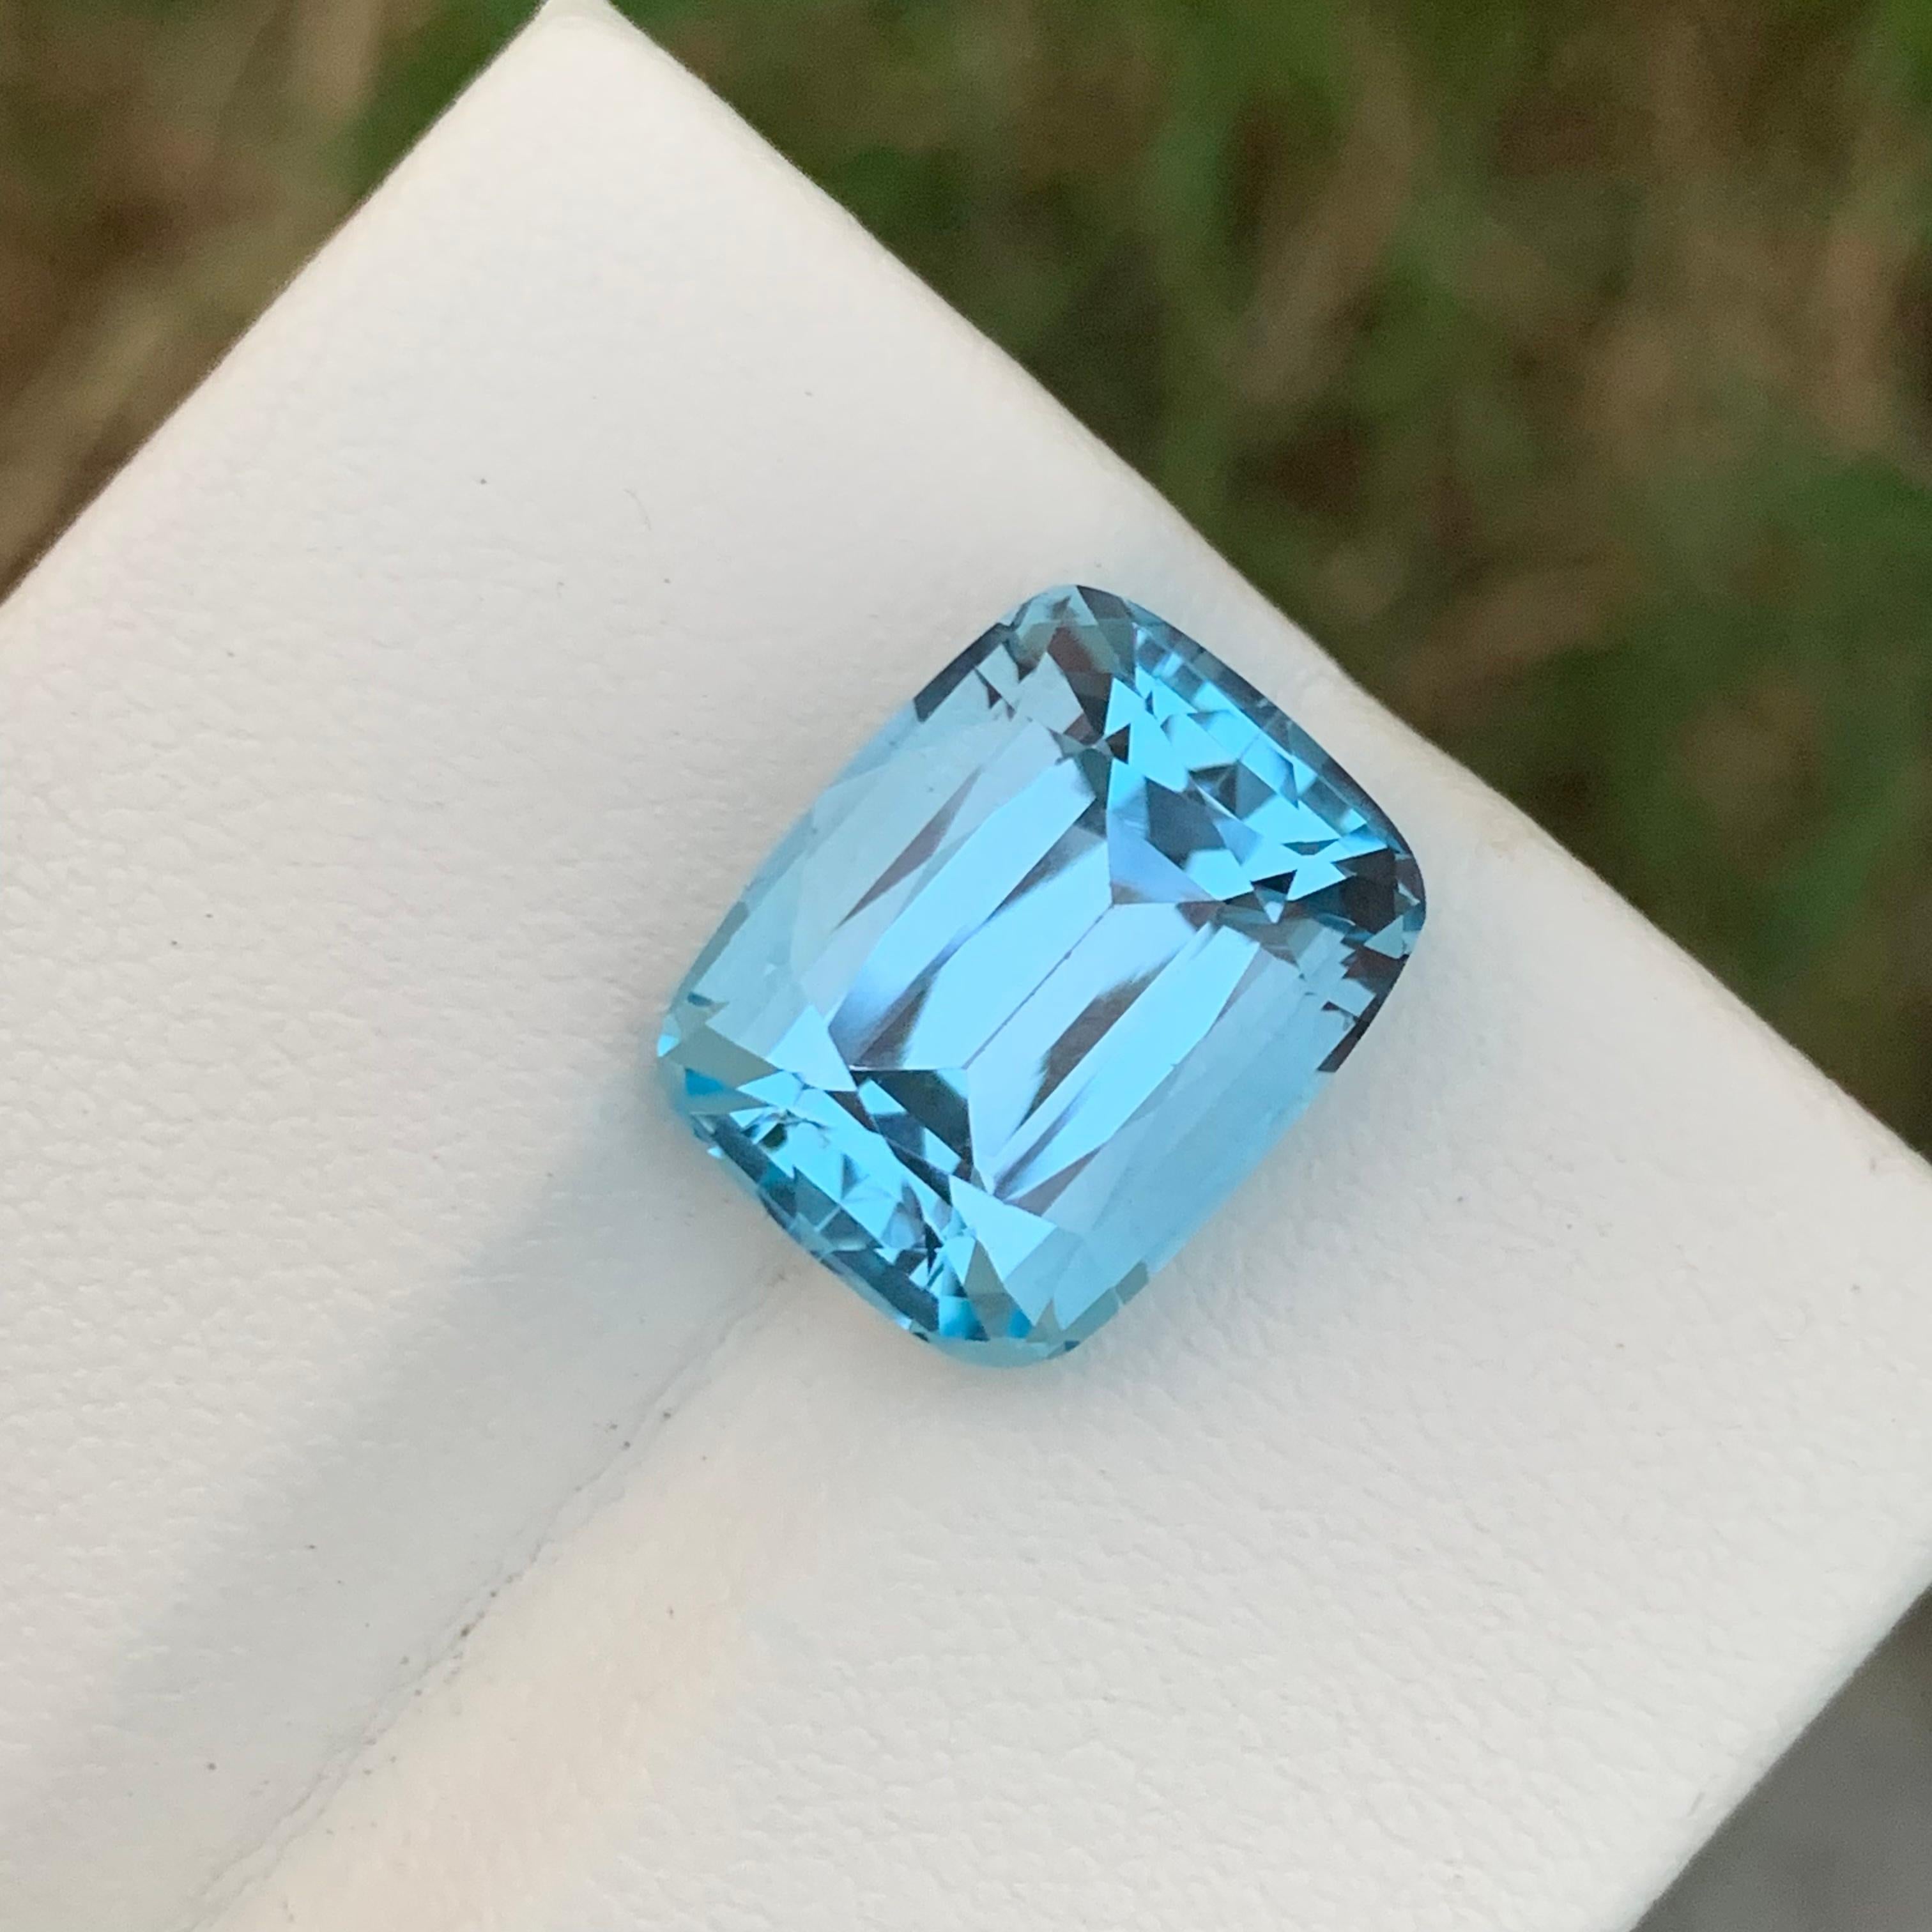 Cushion Cut Gorgeous Clean Faceted Sky Blue Topaz 12 Carat From Brazil Mine Cushion Shape  For Sale